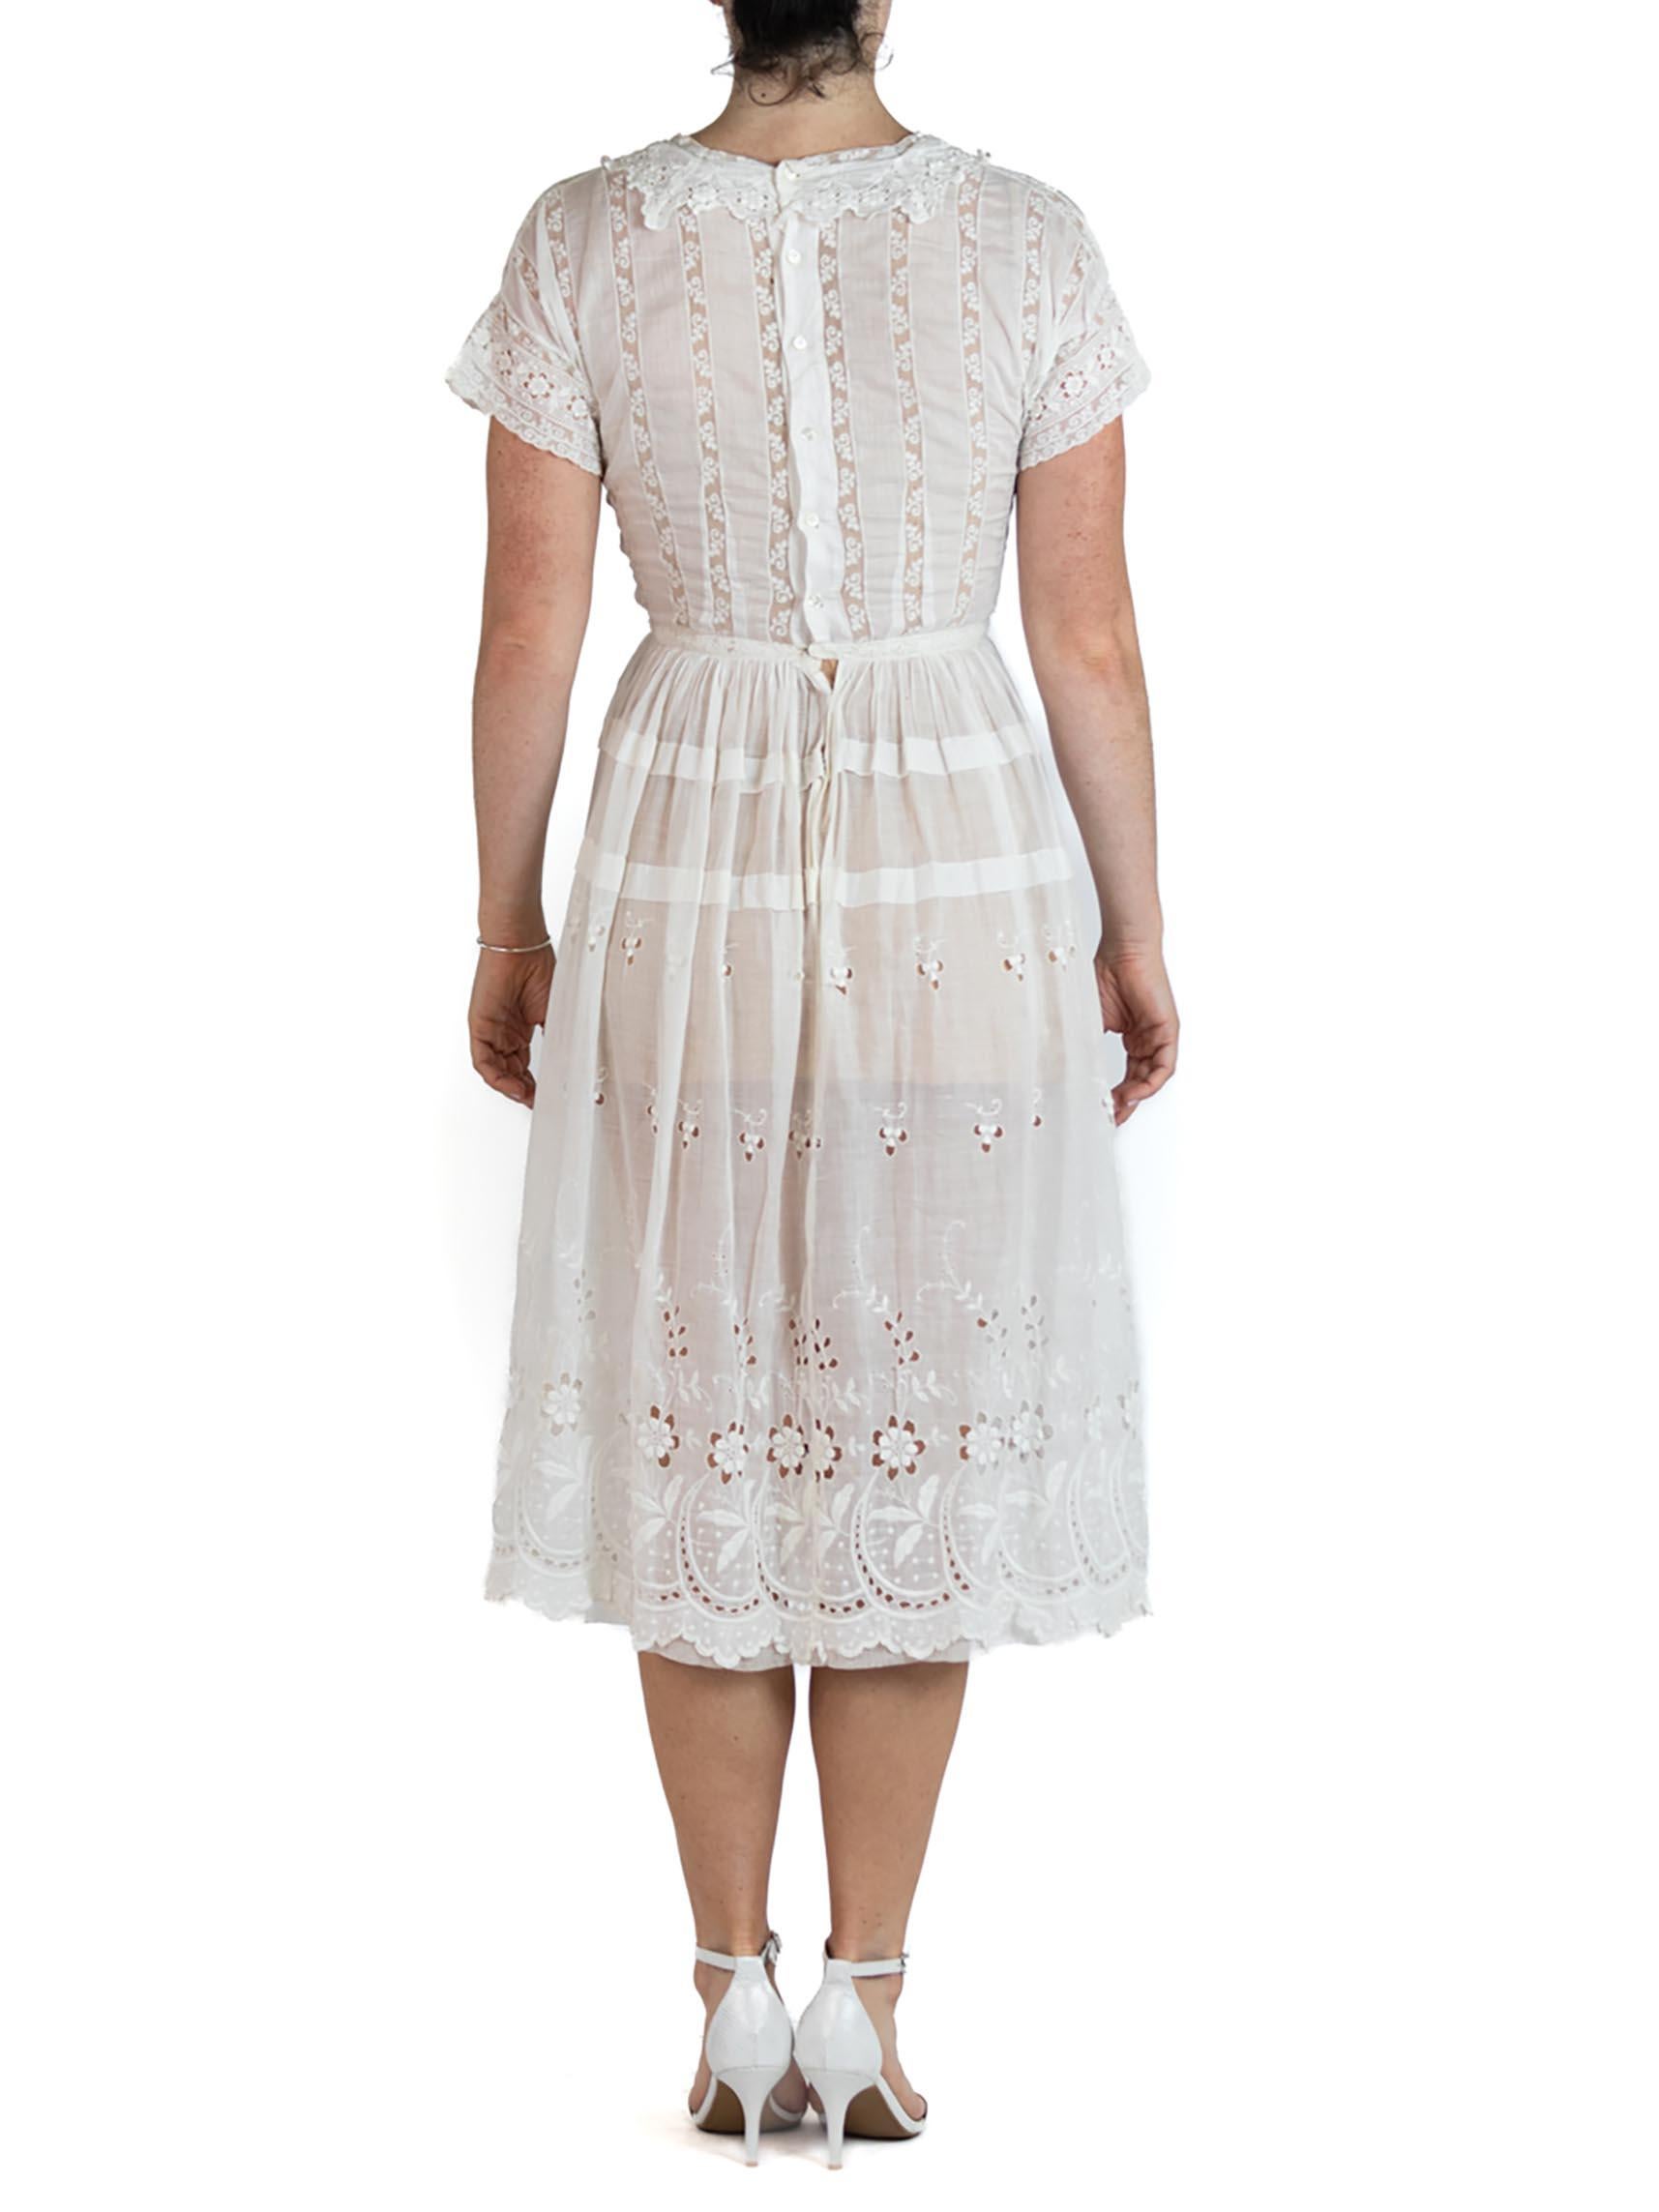 Edwardian White Organic Cotton Lawn Embroidered Lace Summer Tea Dress For Sale 3